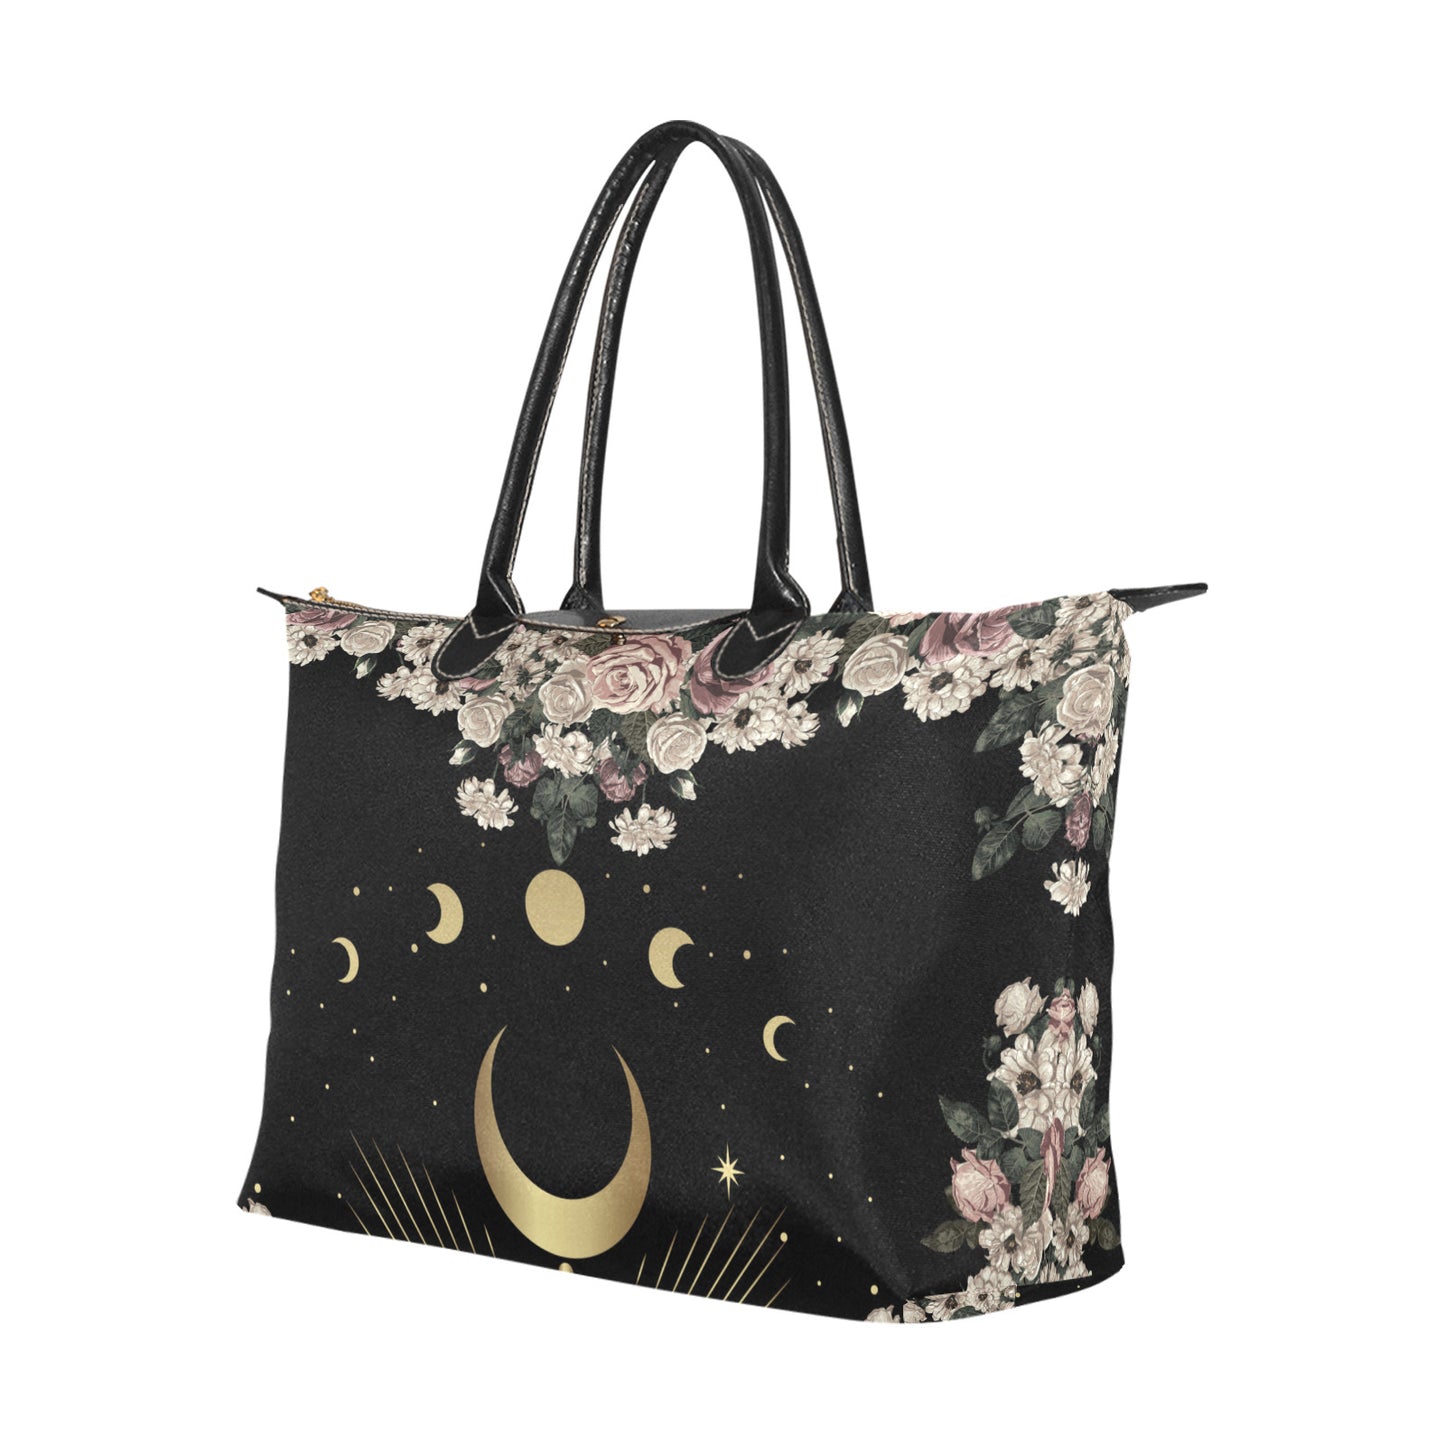 Pale rose moon phase Witch zip tote Women's Classic Handbag